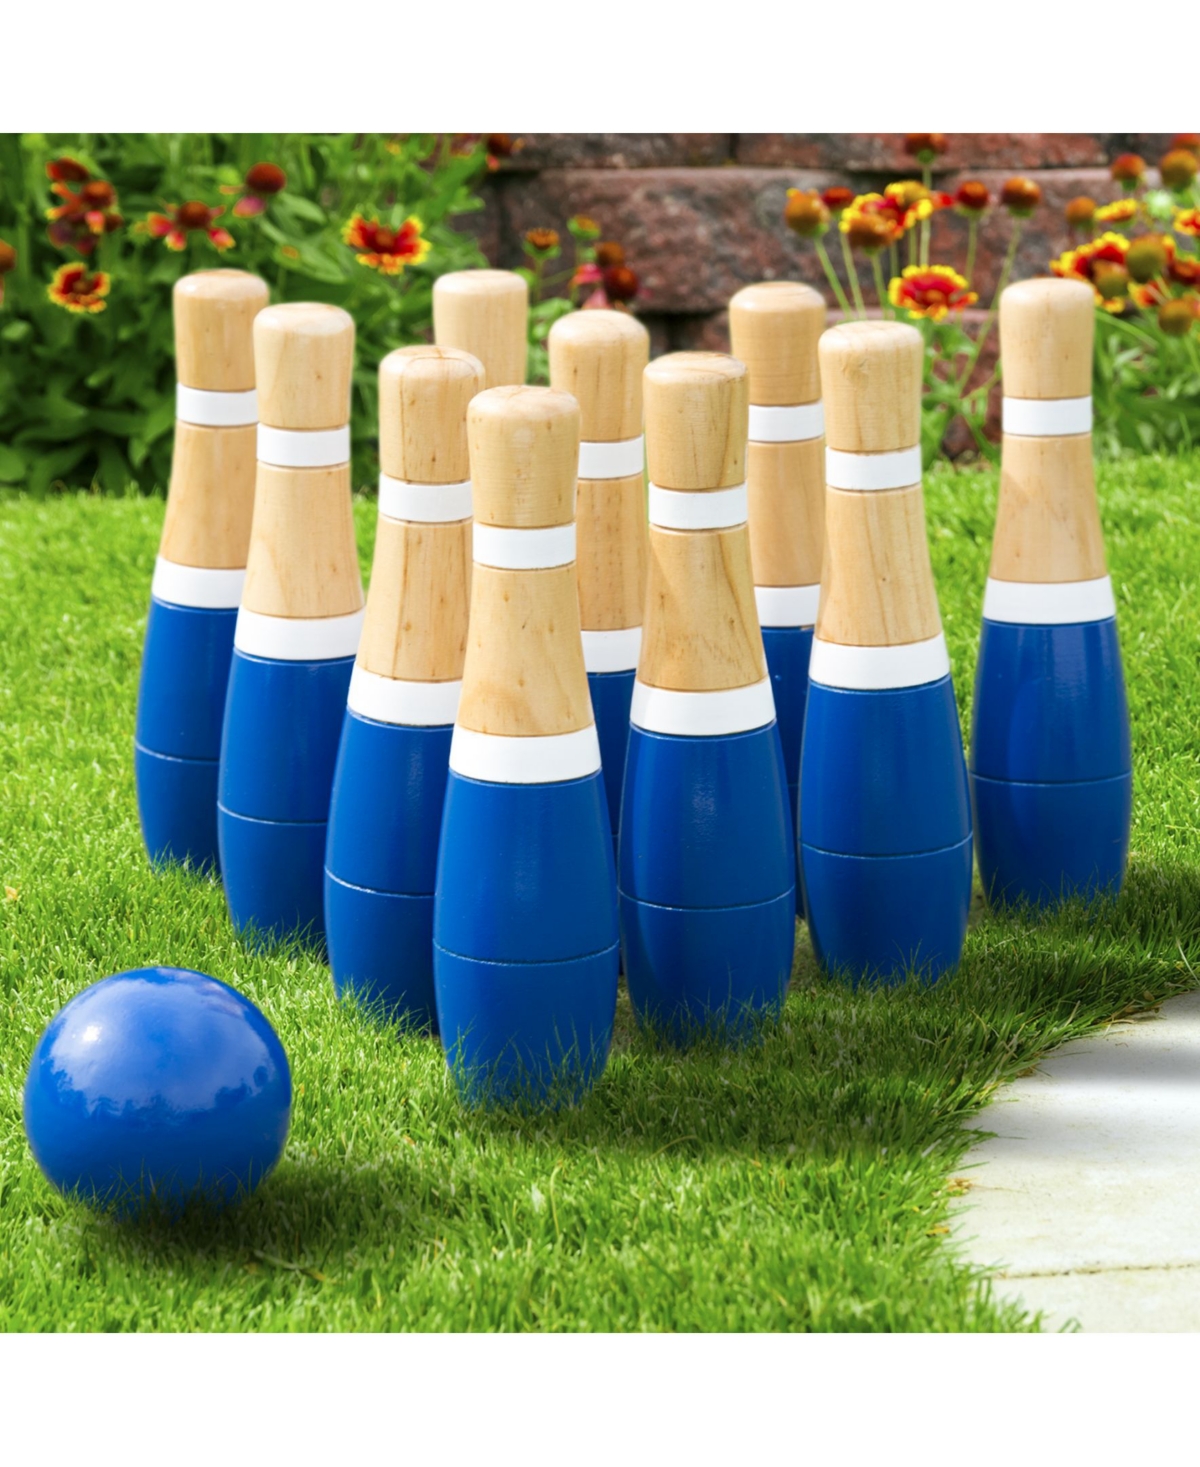 Trademark Global Hey Play 8 Inch Wooden Lawn Bowling Set In Blue